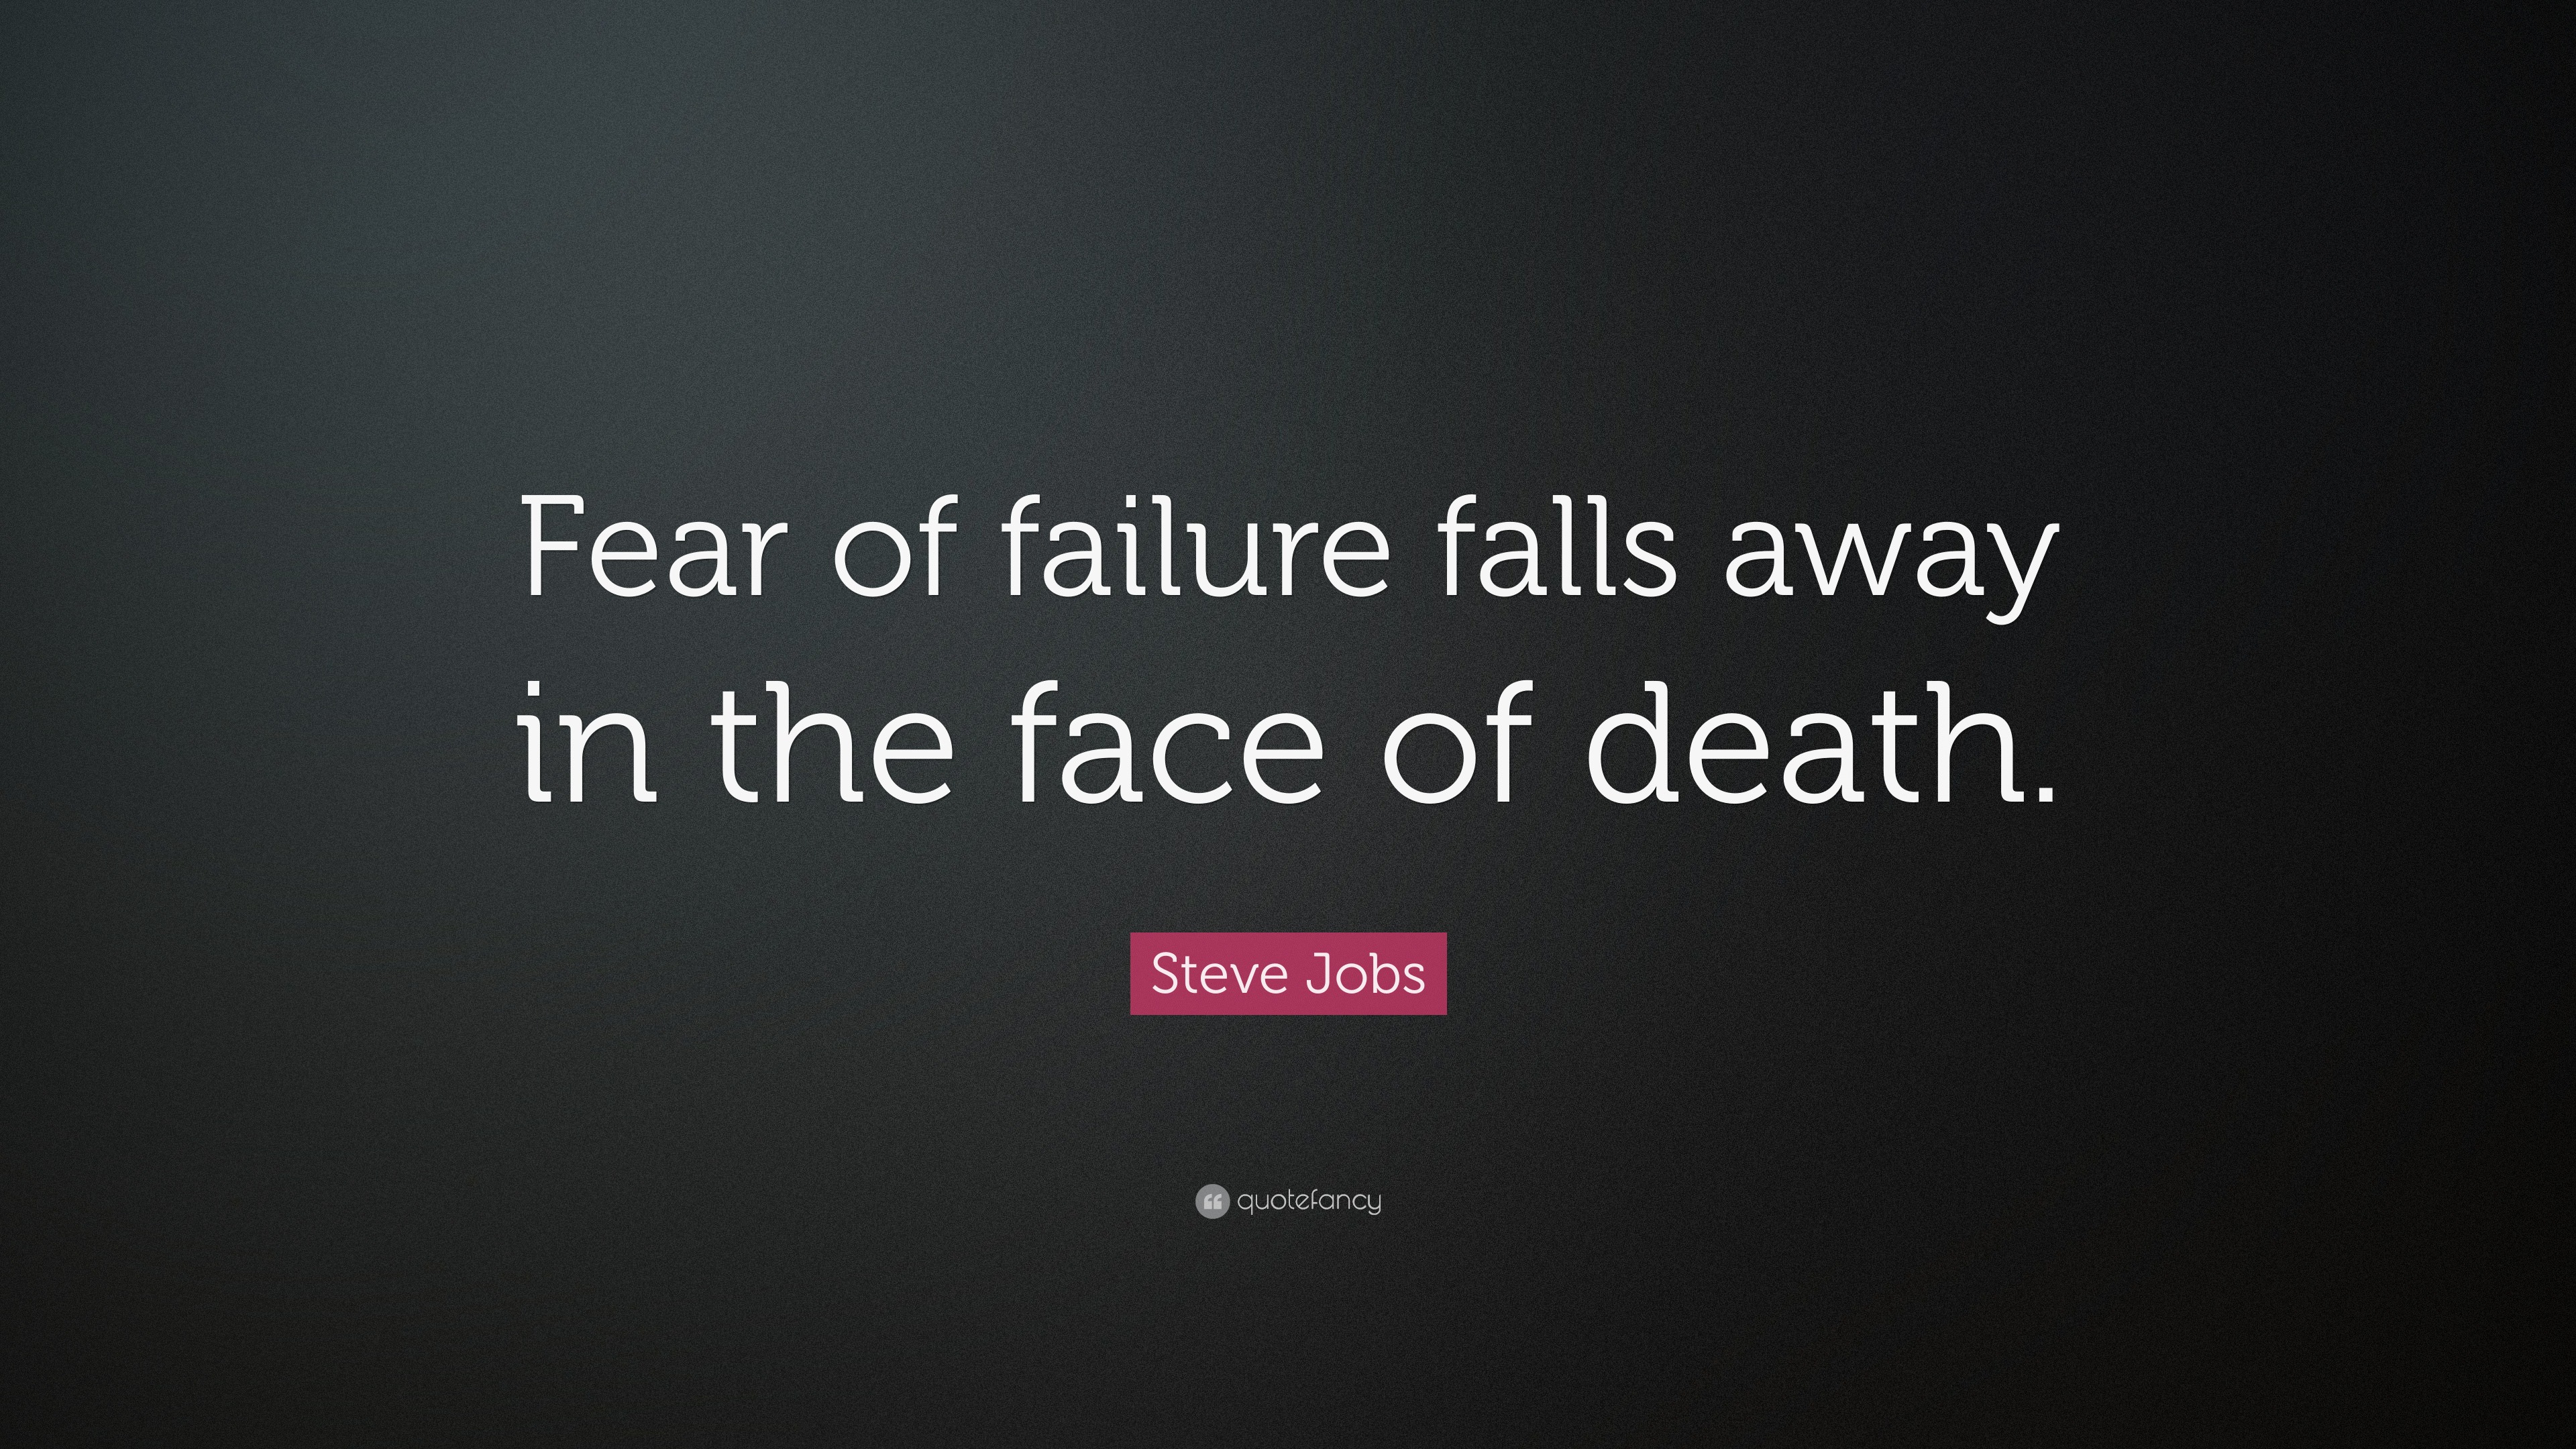 Steve Jobs Quote: “Fear of failure falls away in the face of death.”